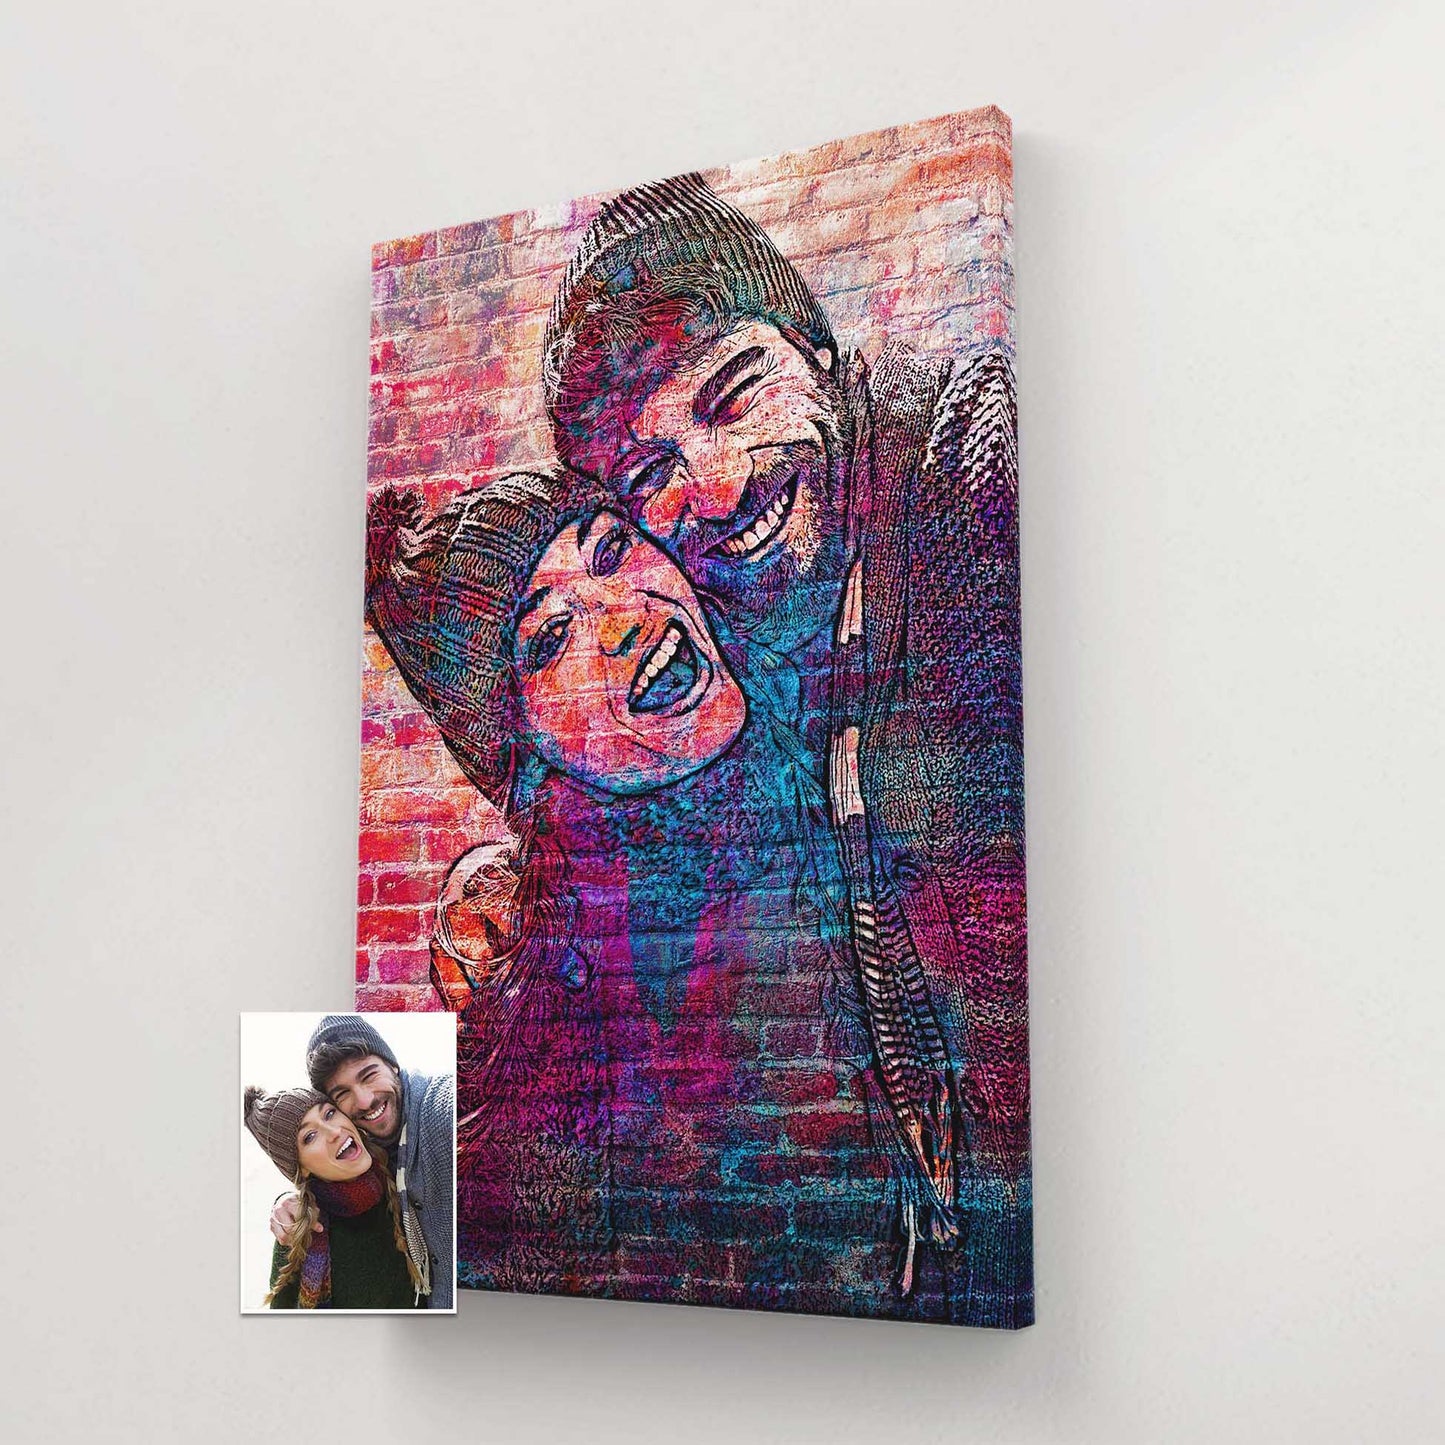 Personalised Brick Graffiti Street Art Canvas - Unleash your creativity with this wall art created from your photo. The urban-inspired design on a brick canvas captures the essence of street art. Its vibrant and bright colors 